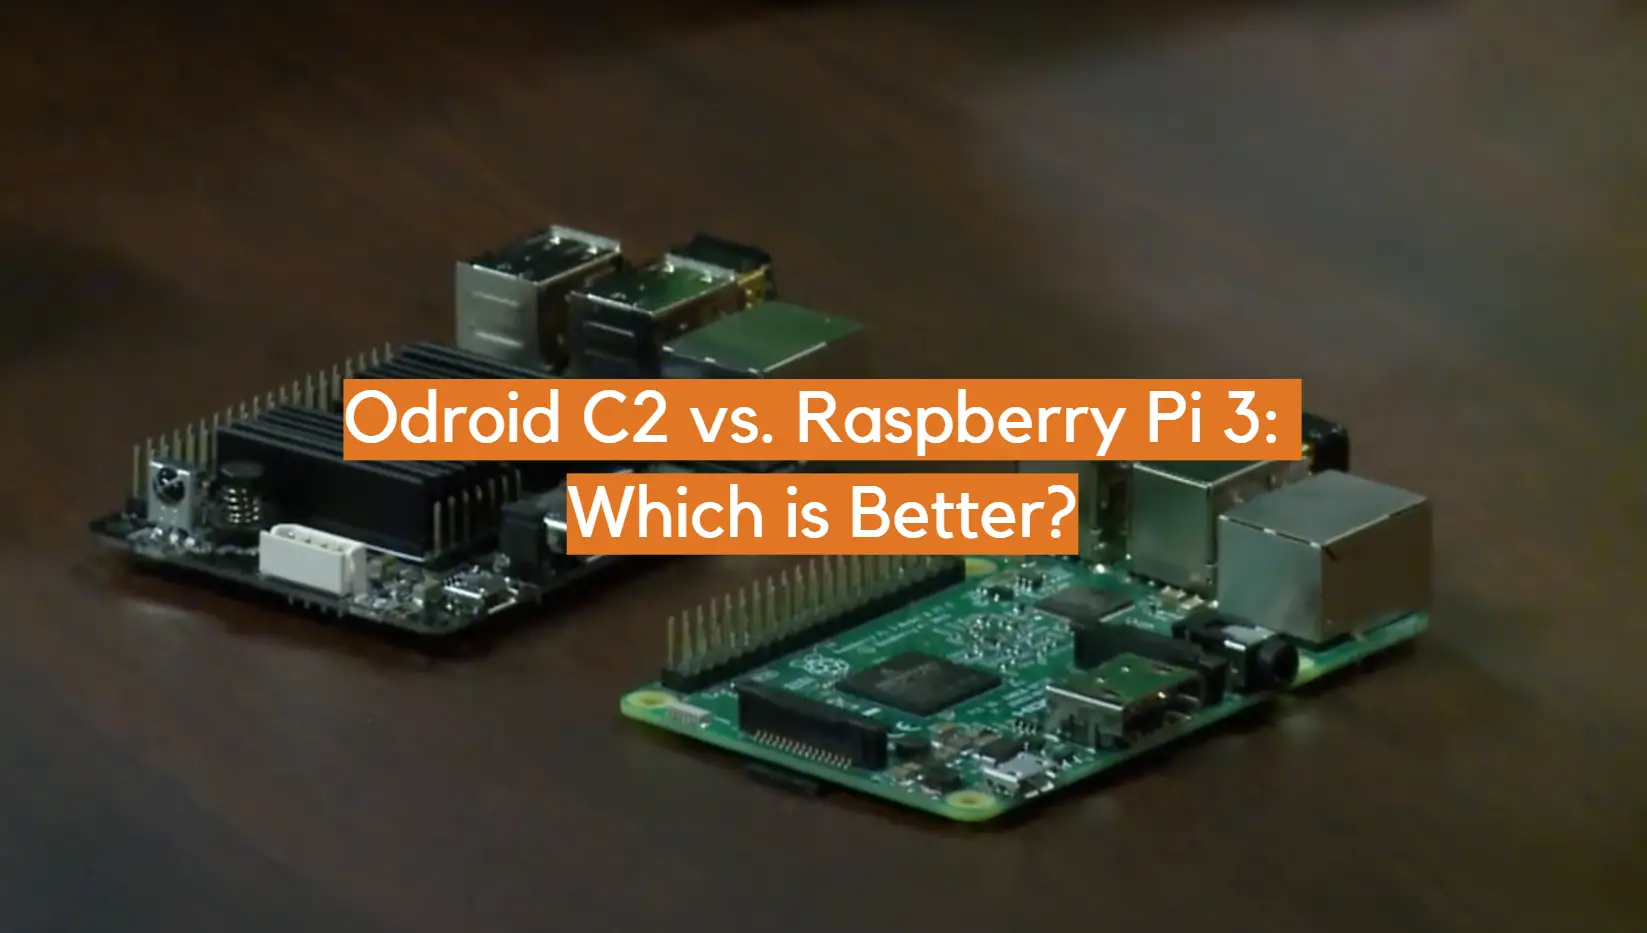 Odroid C2 vs. Raspberry Pi 3: Which is Better?